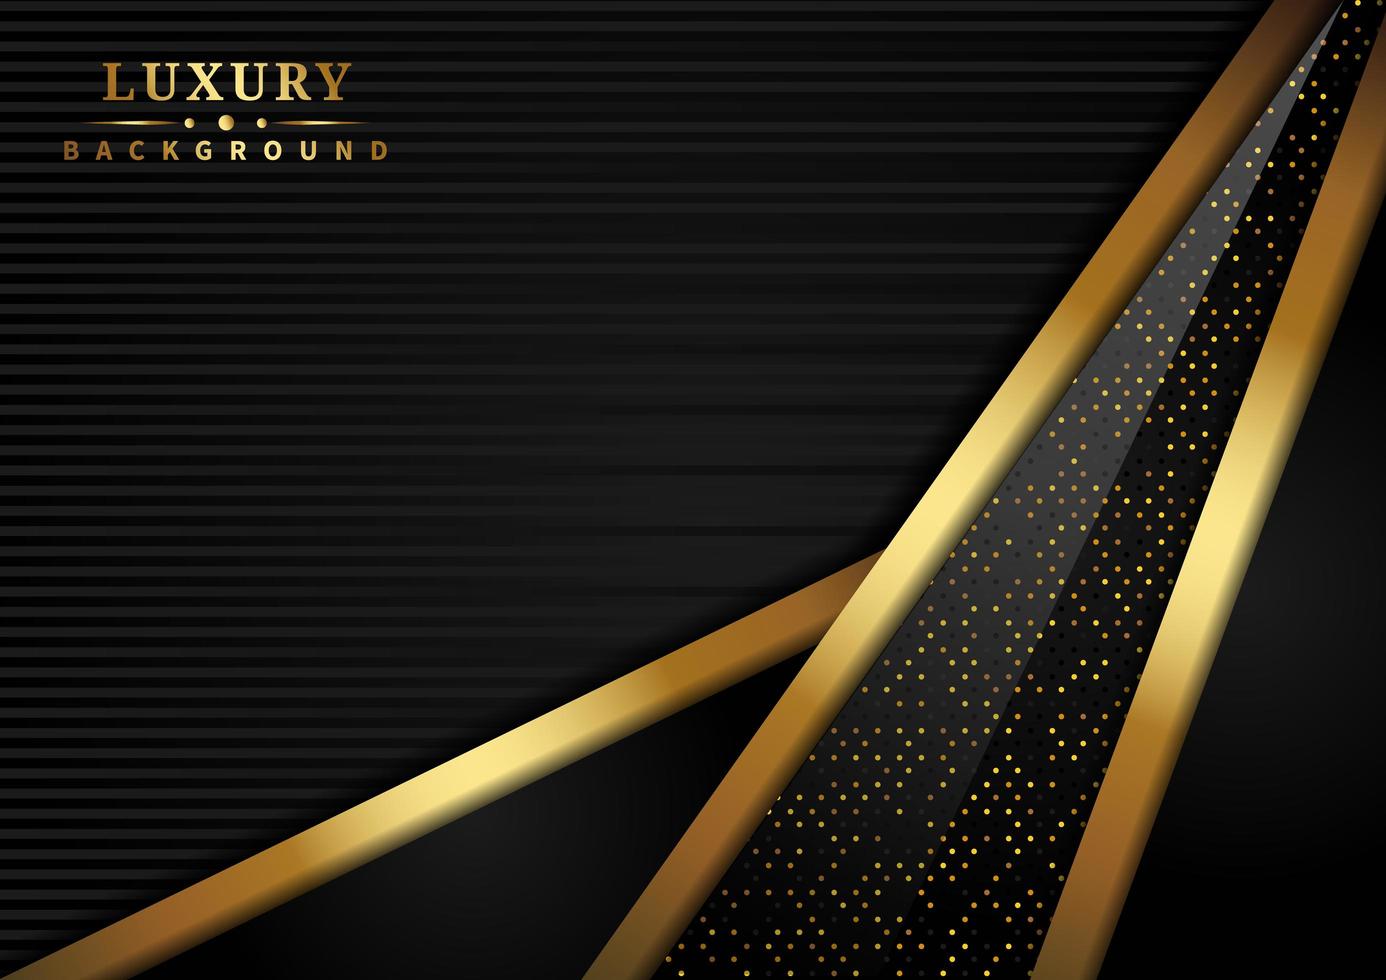 Abstract Luxury Triangle Overlapping  Black and Gold Layer Background  vector